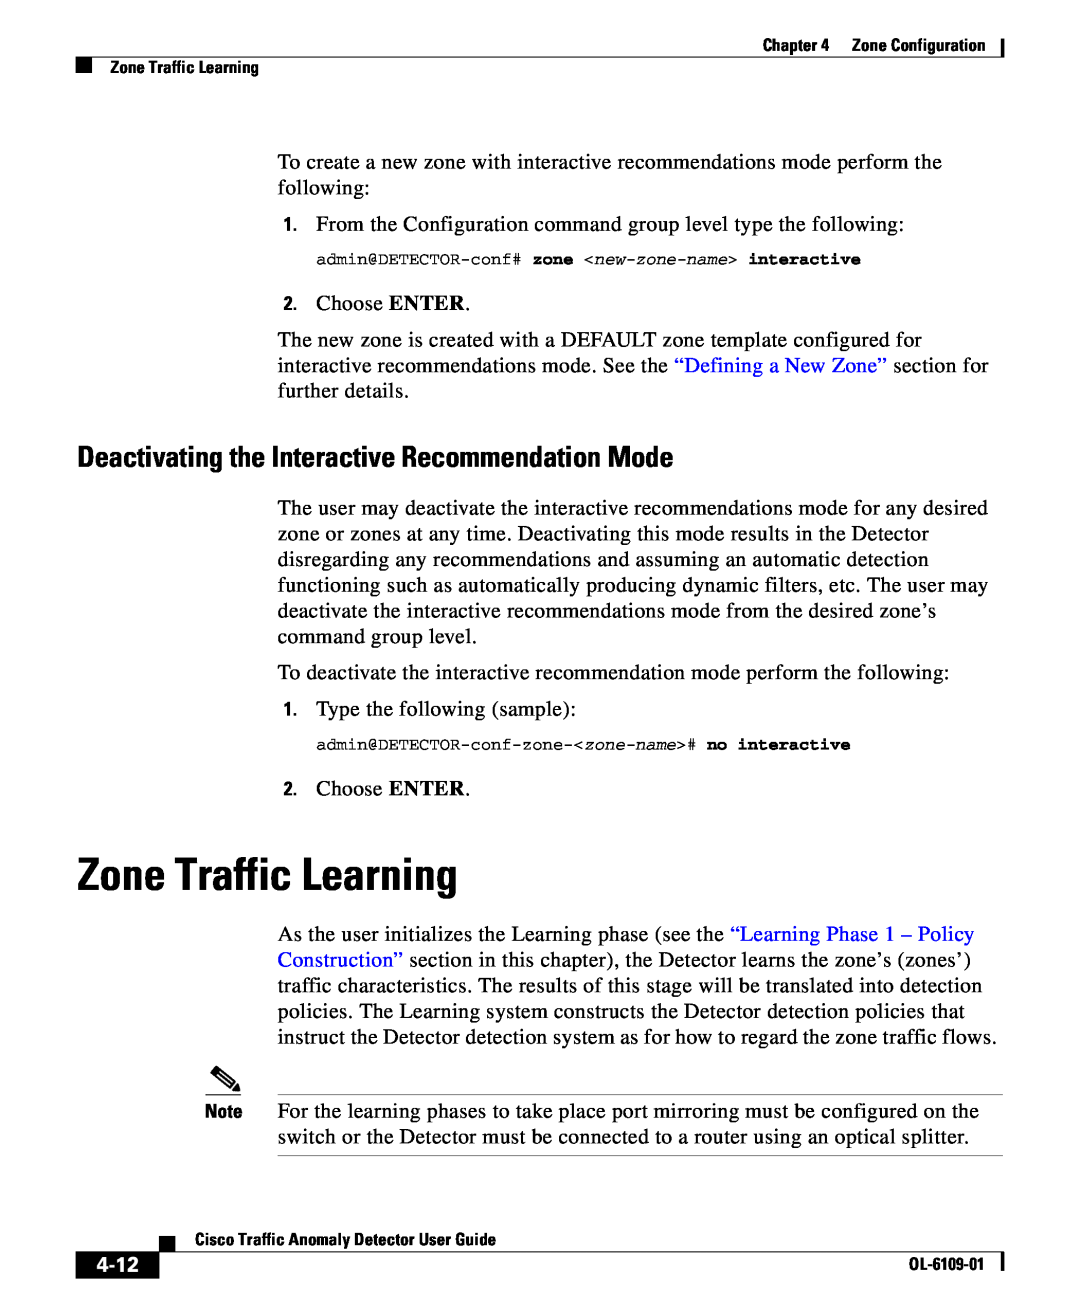 Cisco Systems OL-6109-01 manual Zone Traffic Learning, Deactivating the Interactive Recommendation Mode, 4-12 